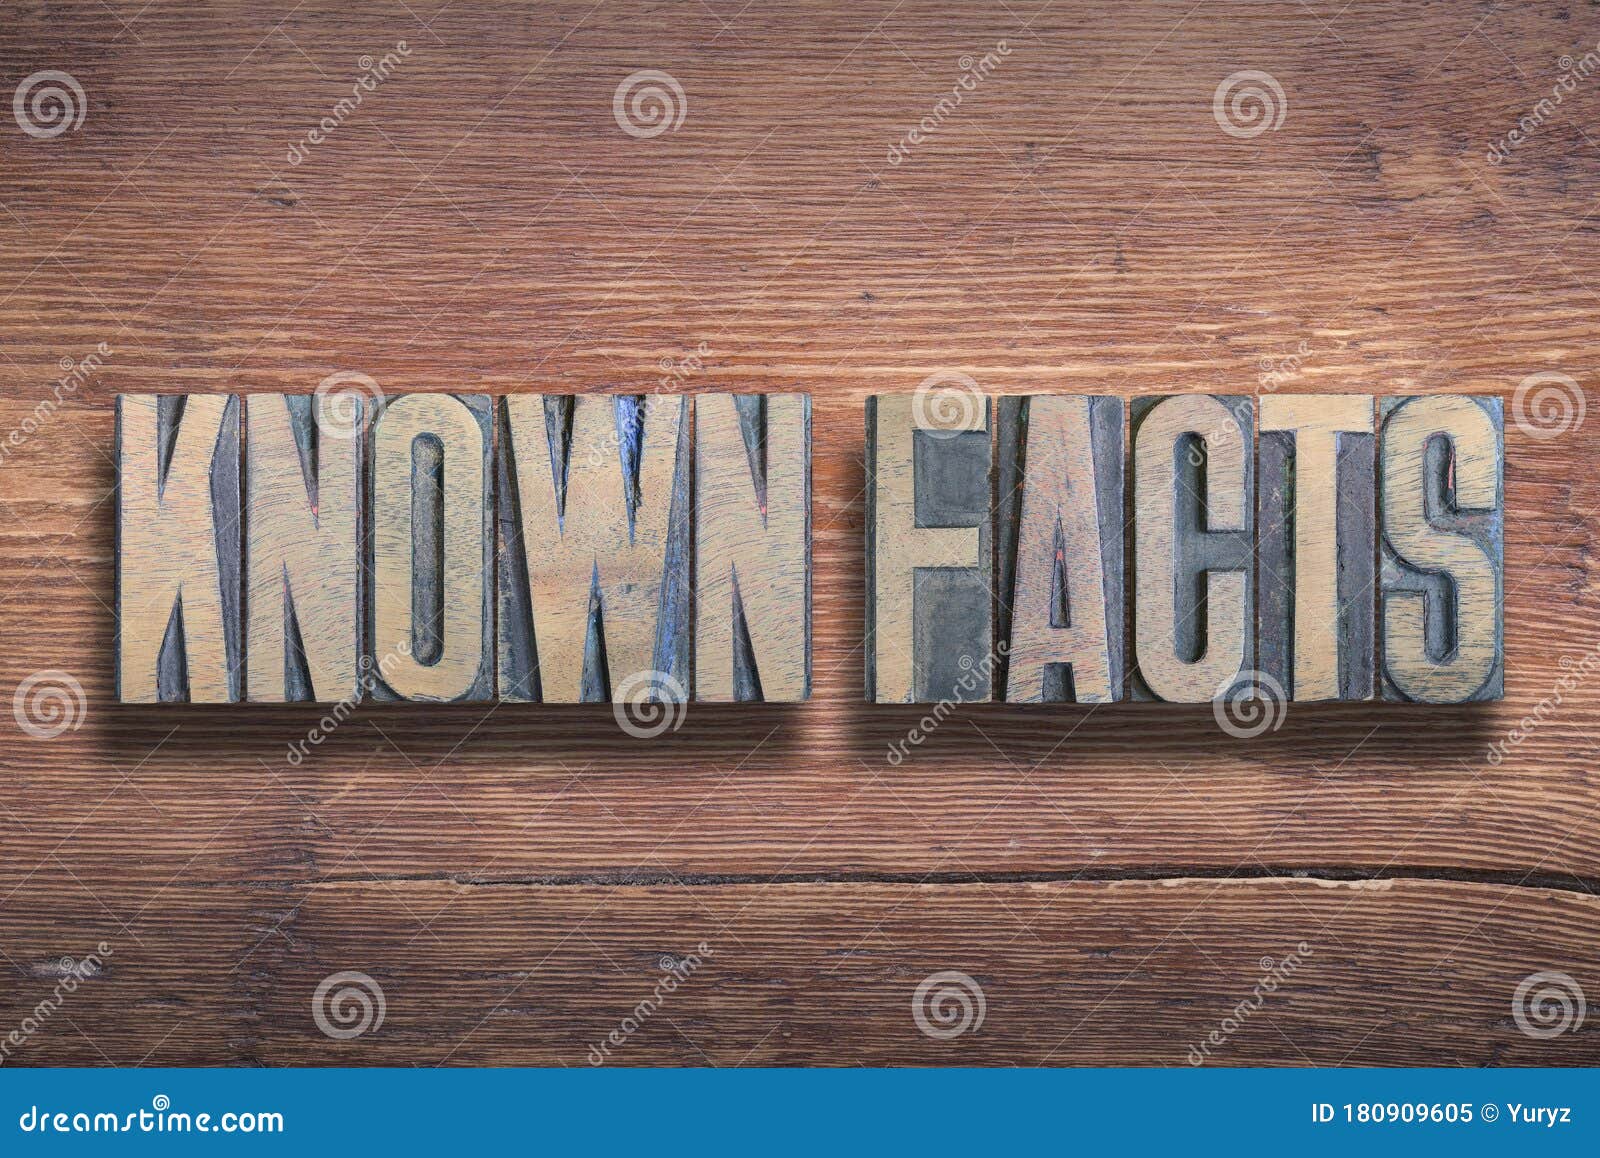 known facts wood